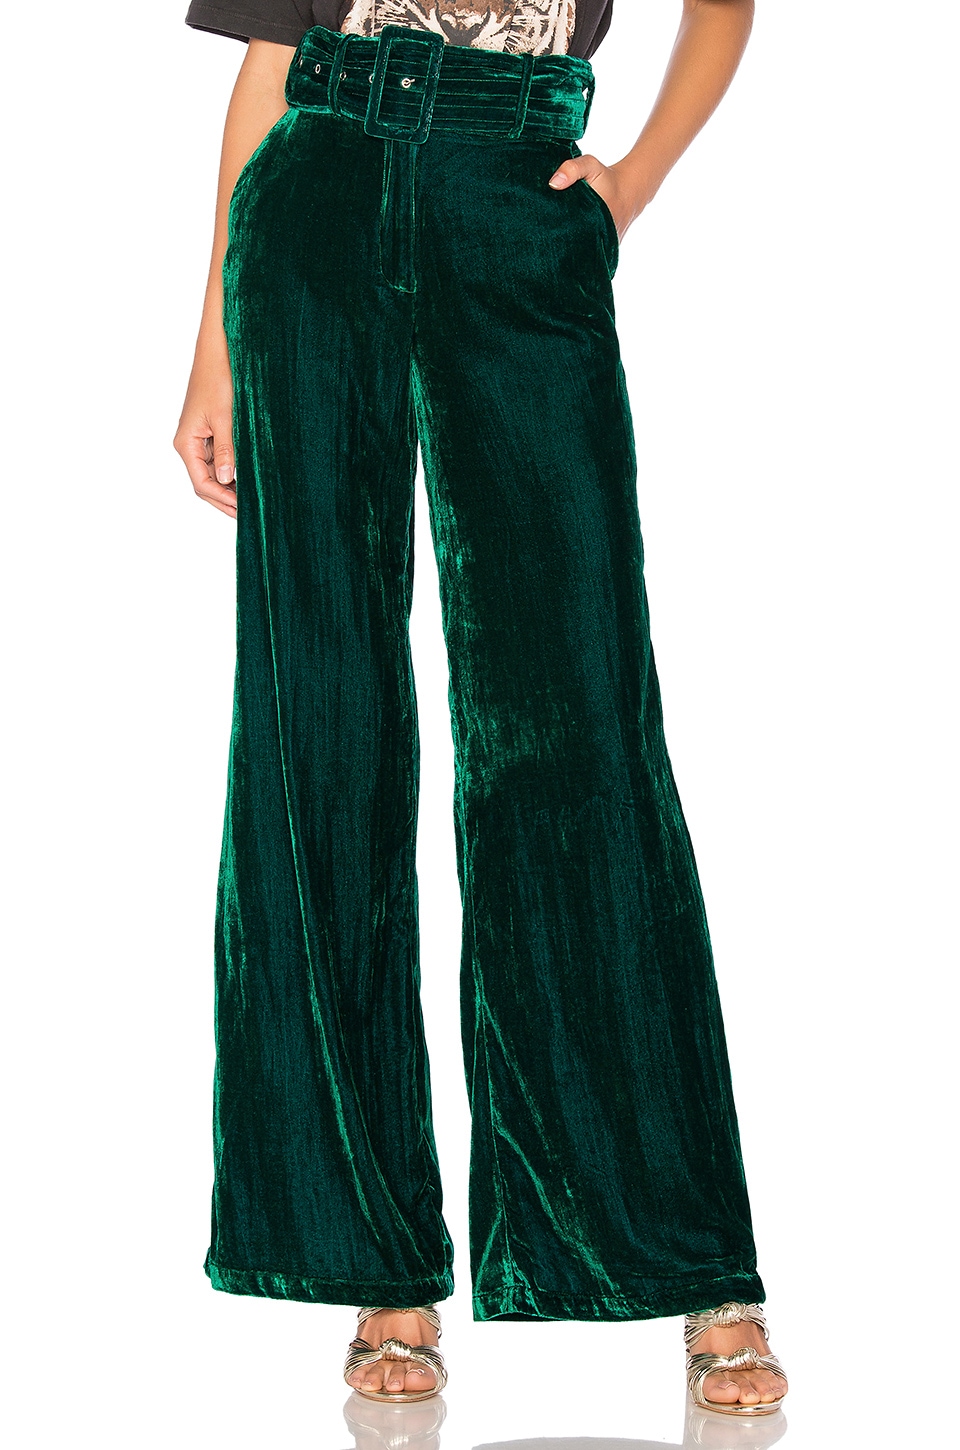 House of Harlow 1960 x REVOLVE Mona Belted Pant in Emerald | REVOLVE